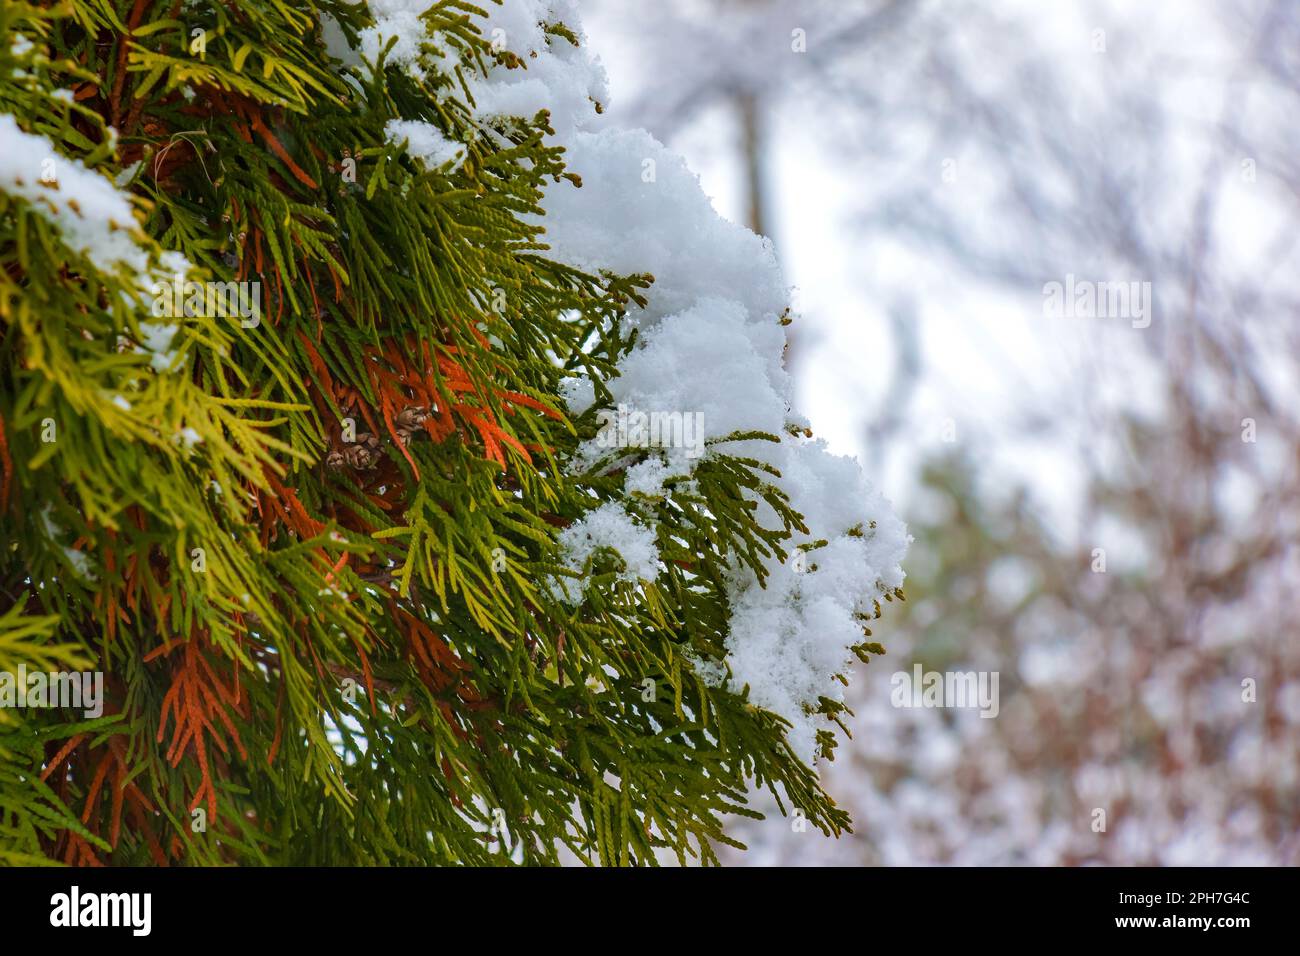 Fresh snow on the branches of thuja occidentalis Smaragd. Frozen needles of an evergreen coniferous tree thuja. Stock Photo